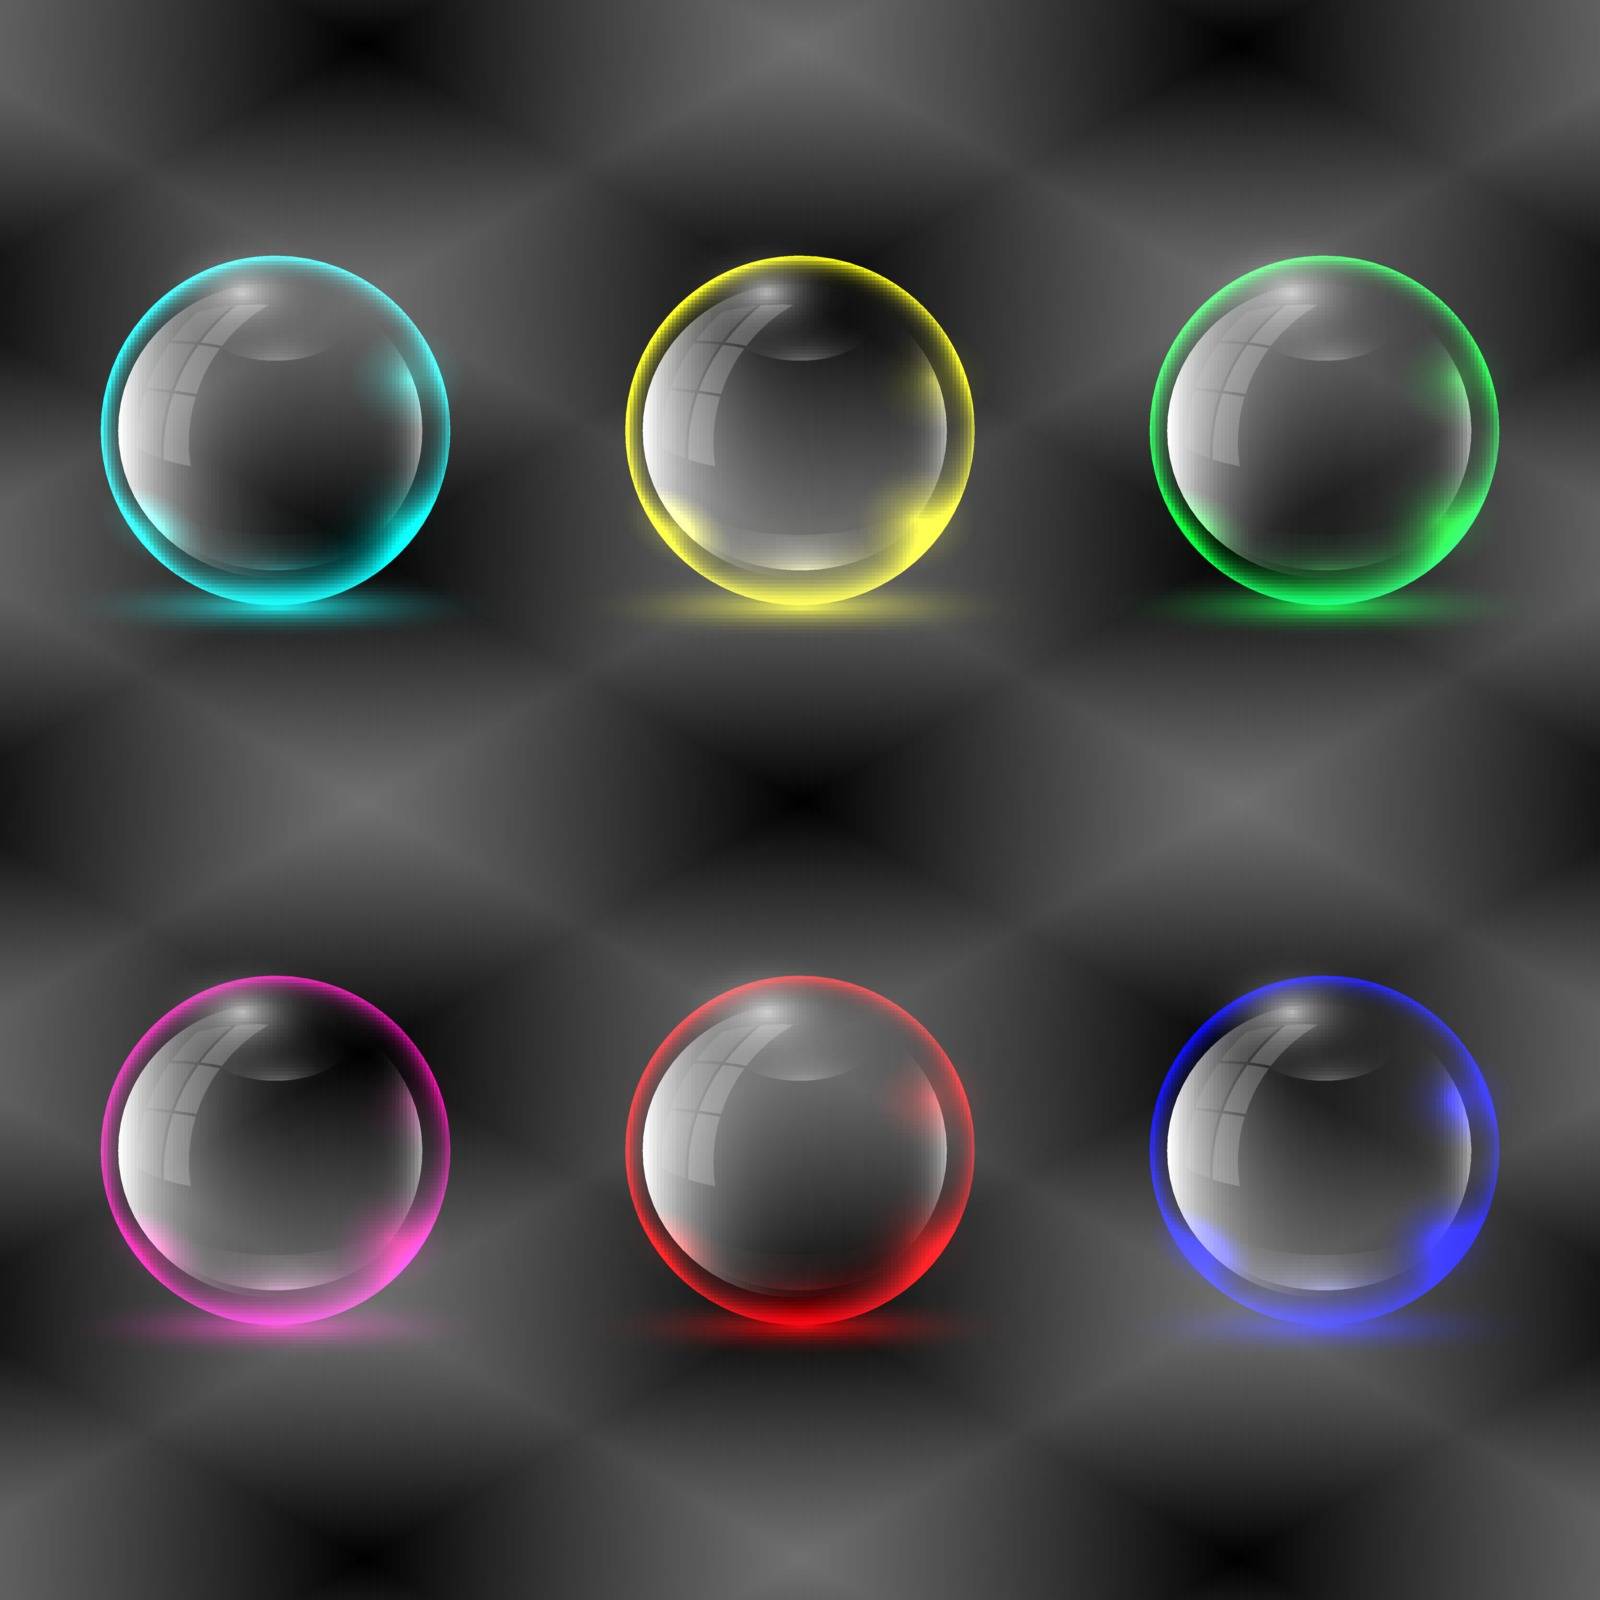 Set of vector illustrations of different colored transparent spheres